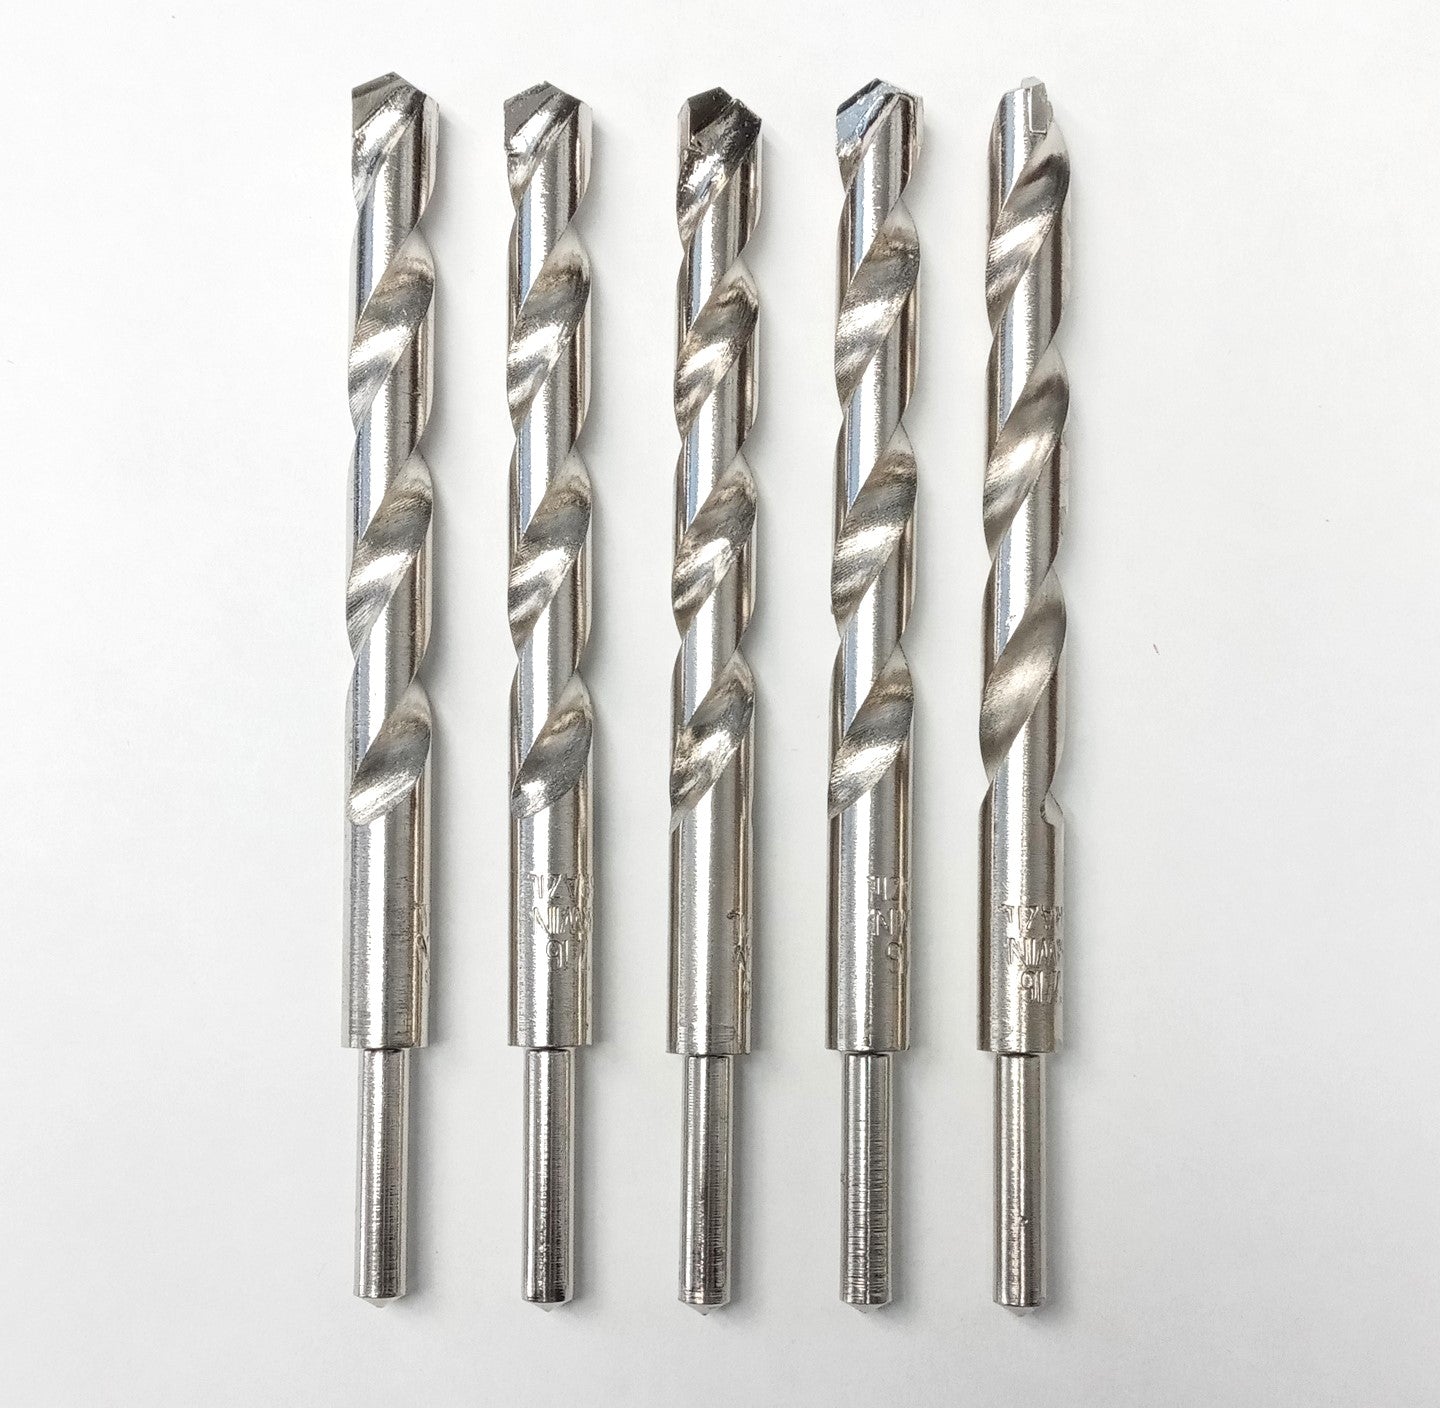 Irwin AW62286 7/16" x 6" Carbide Tipped Masonry Drill Bits 1/4 Reduced Shank 5pc